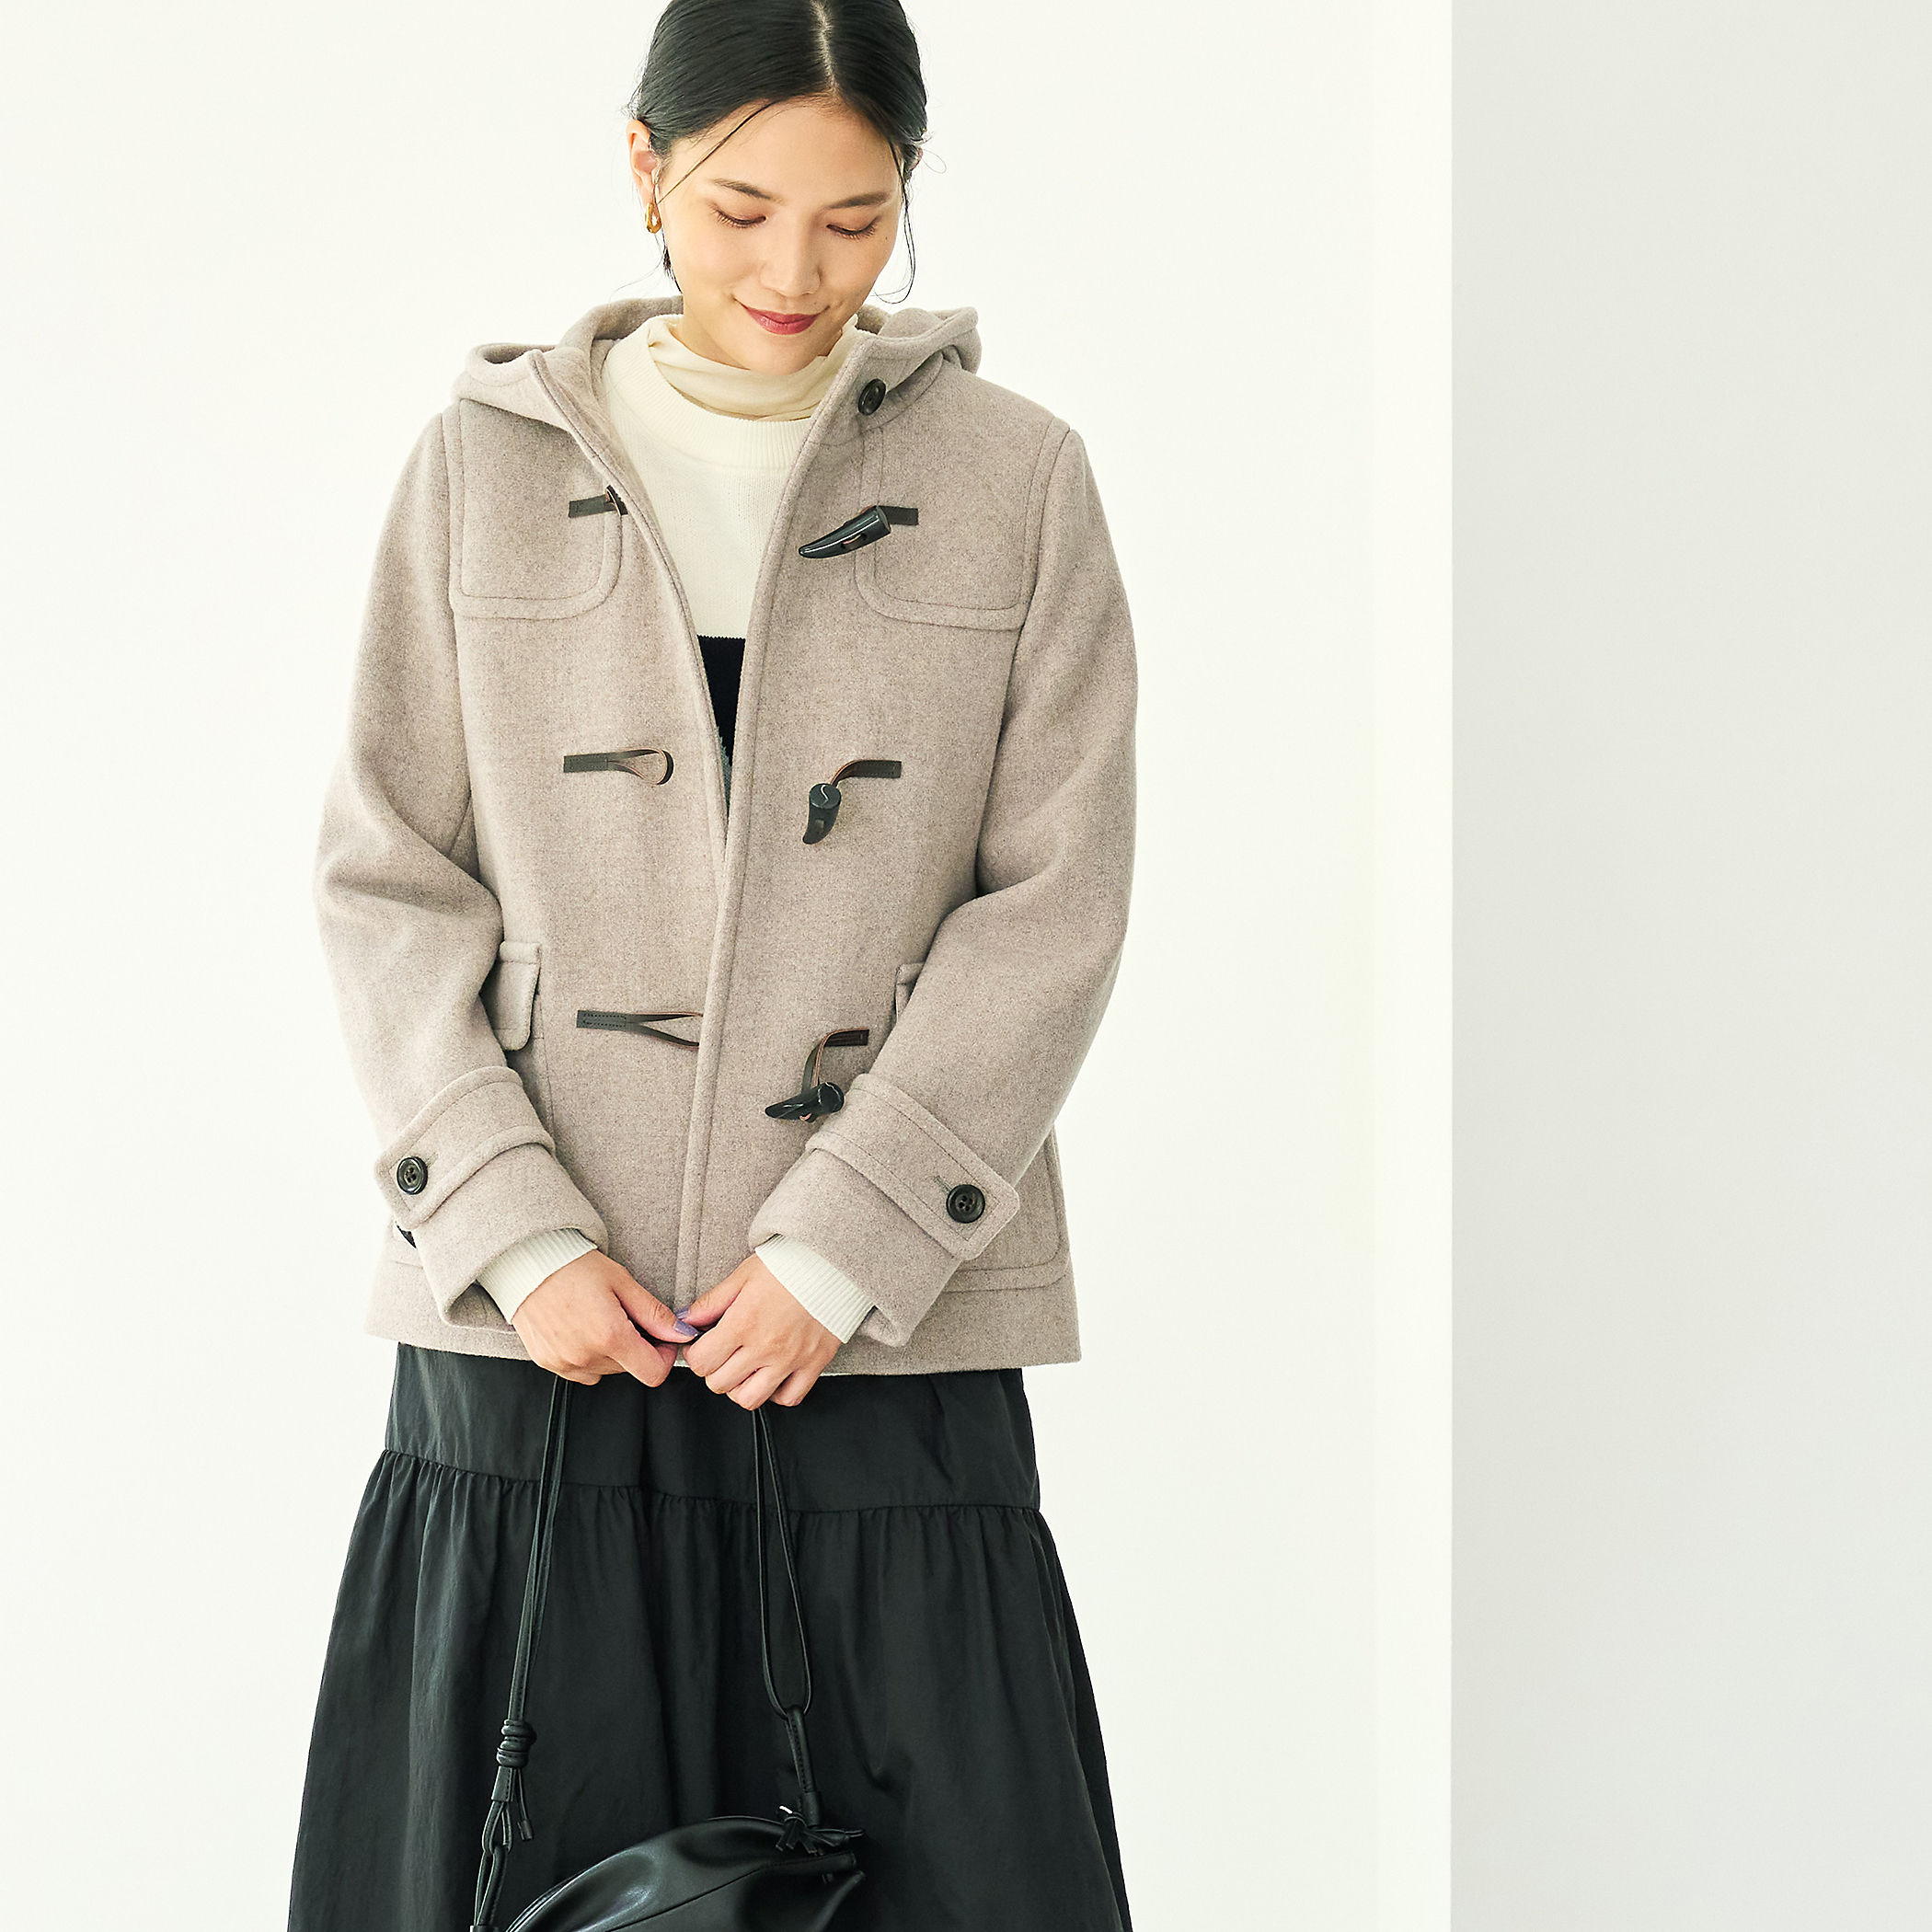 UNITED ARROWS green label relaxing
【WEB限定】ダッフルコート ショート
￥27,500